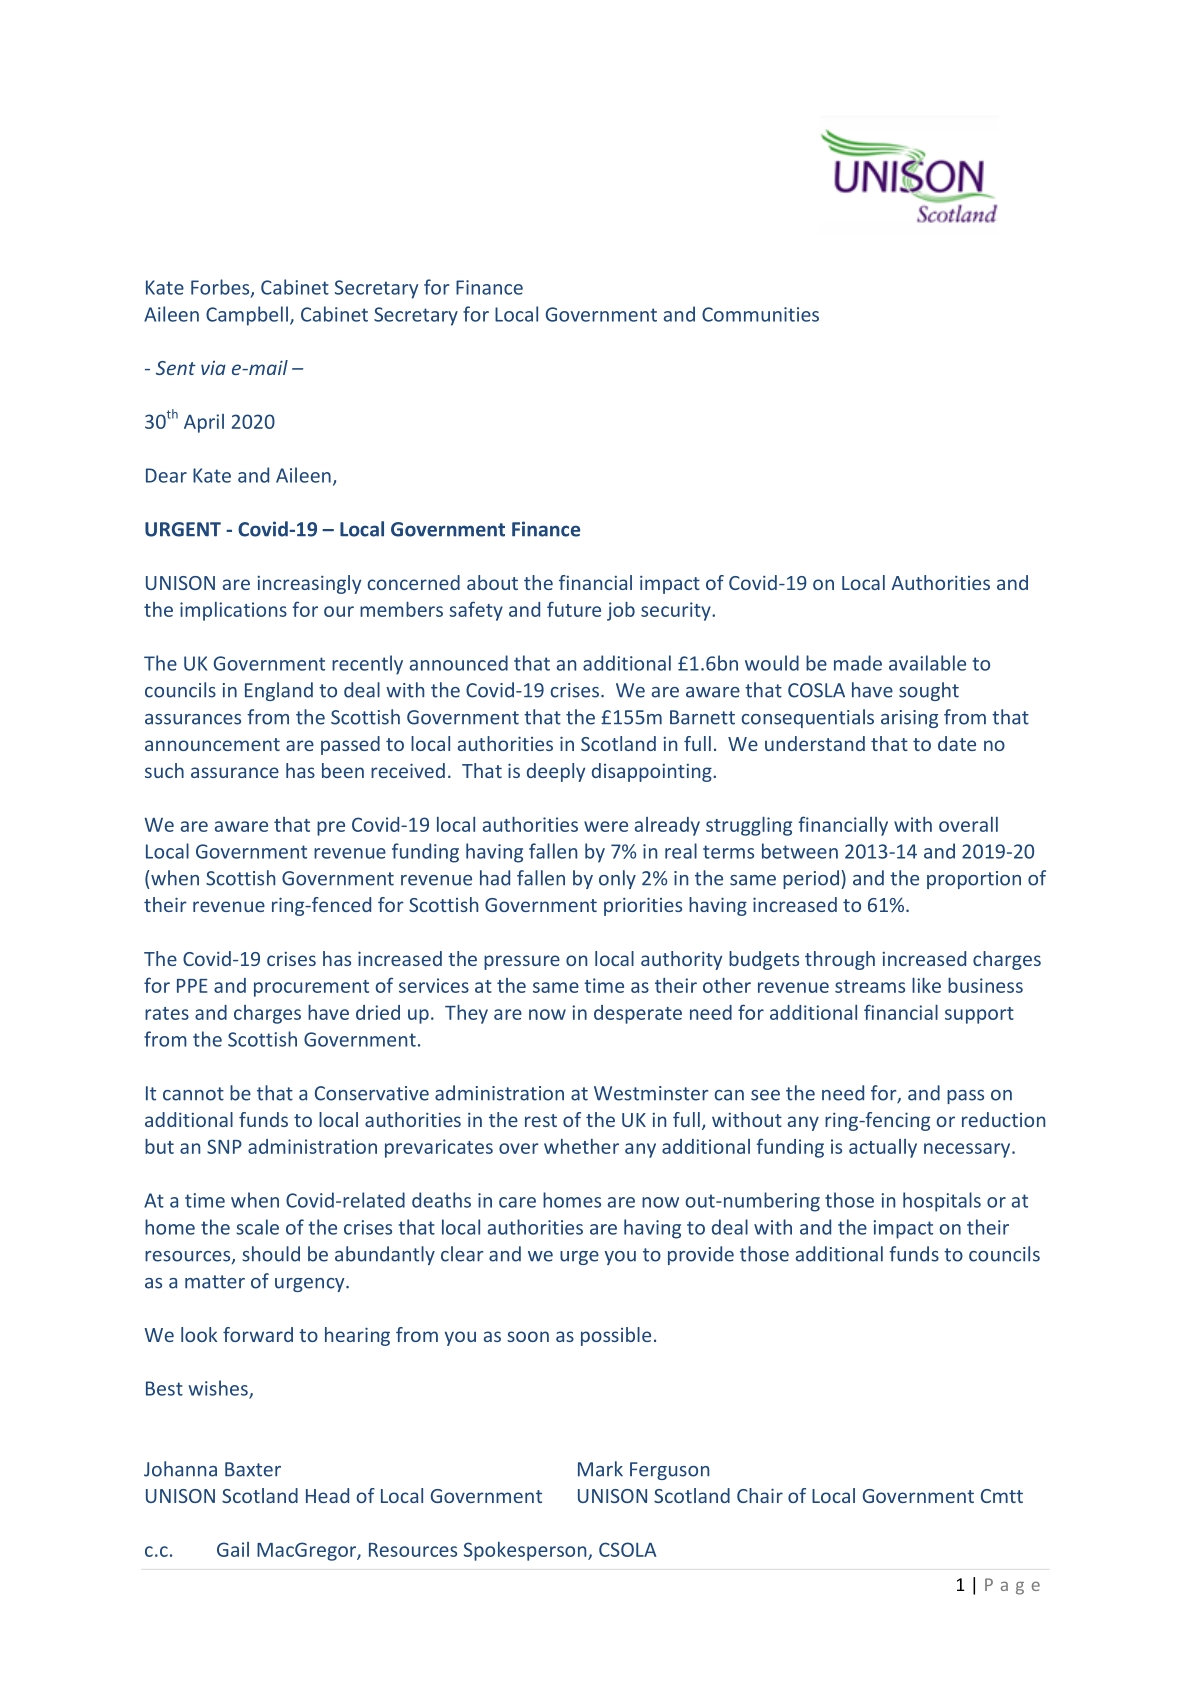 Letter from Unison to Kate Forbes, Cabinet Secretary for Finance and Aileen Campbell, Cabinet Secretary for Local Government and Communities dated 30 April 2020